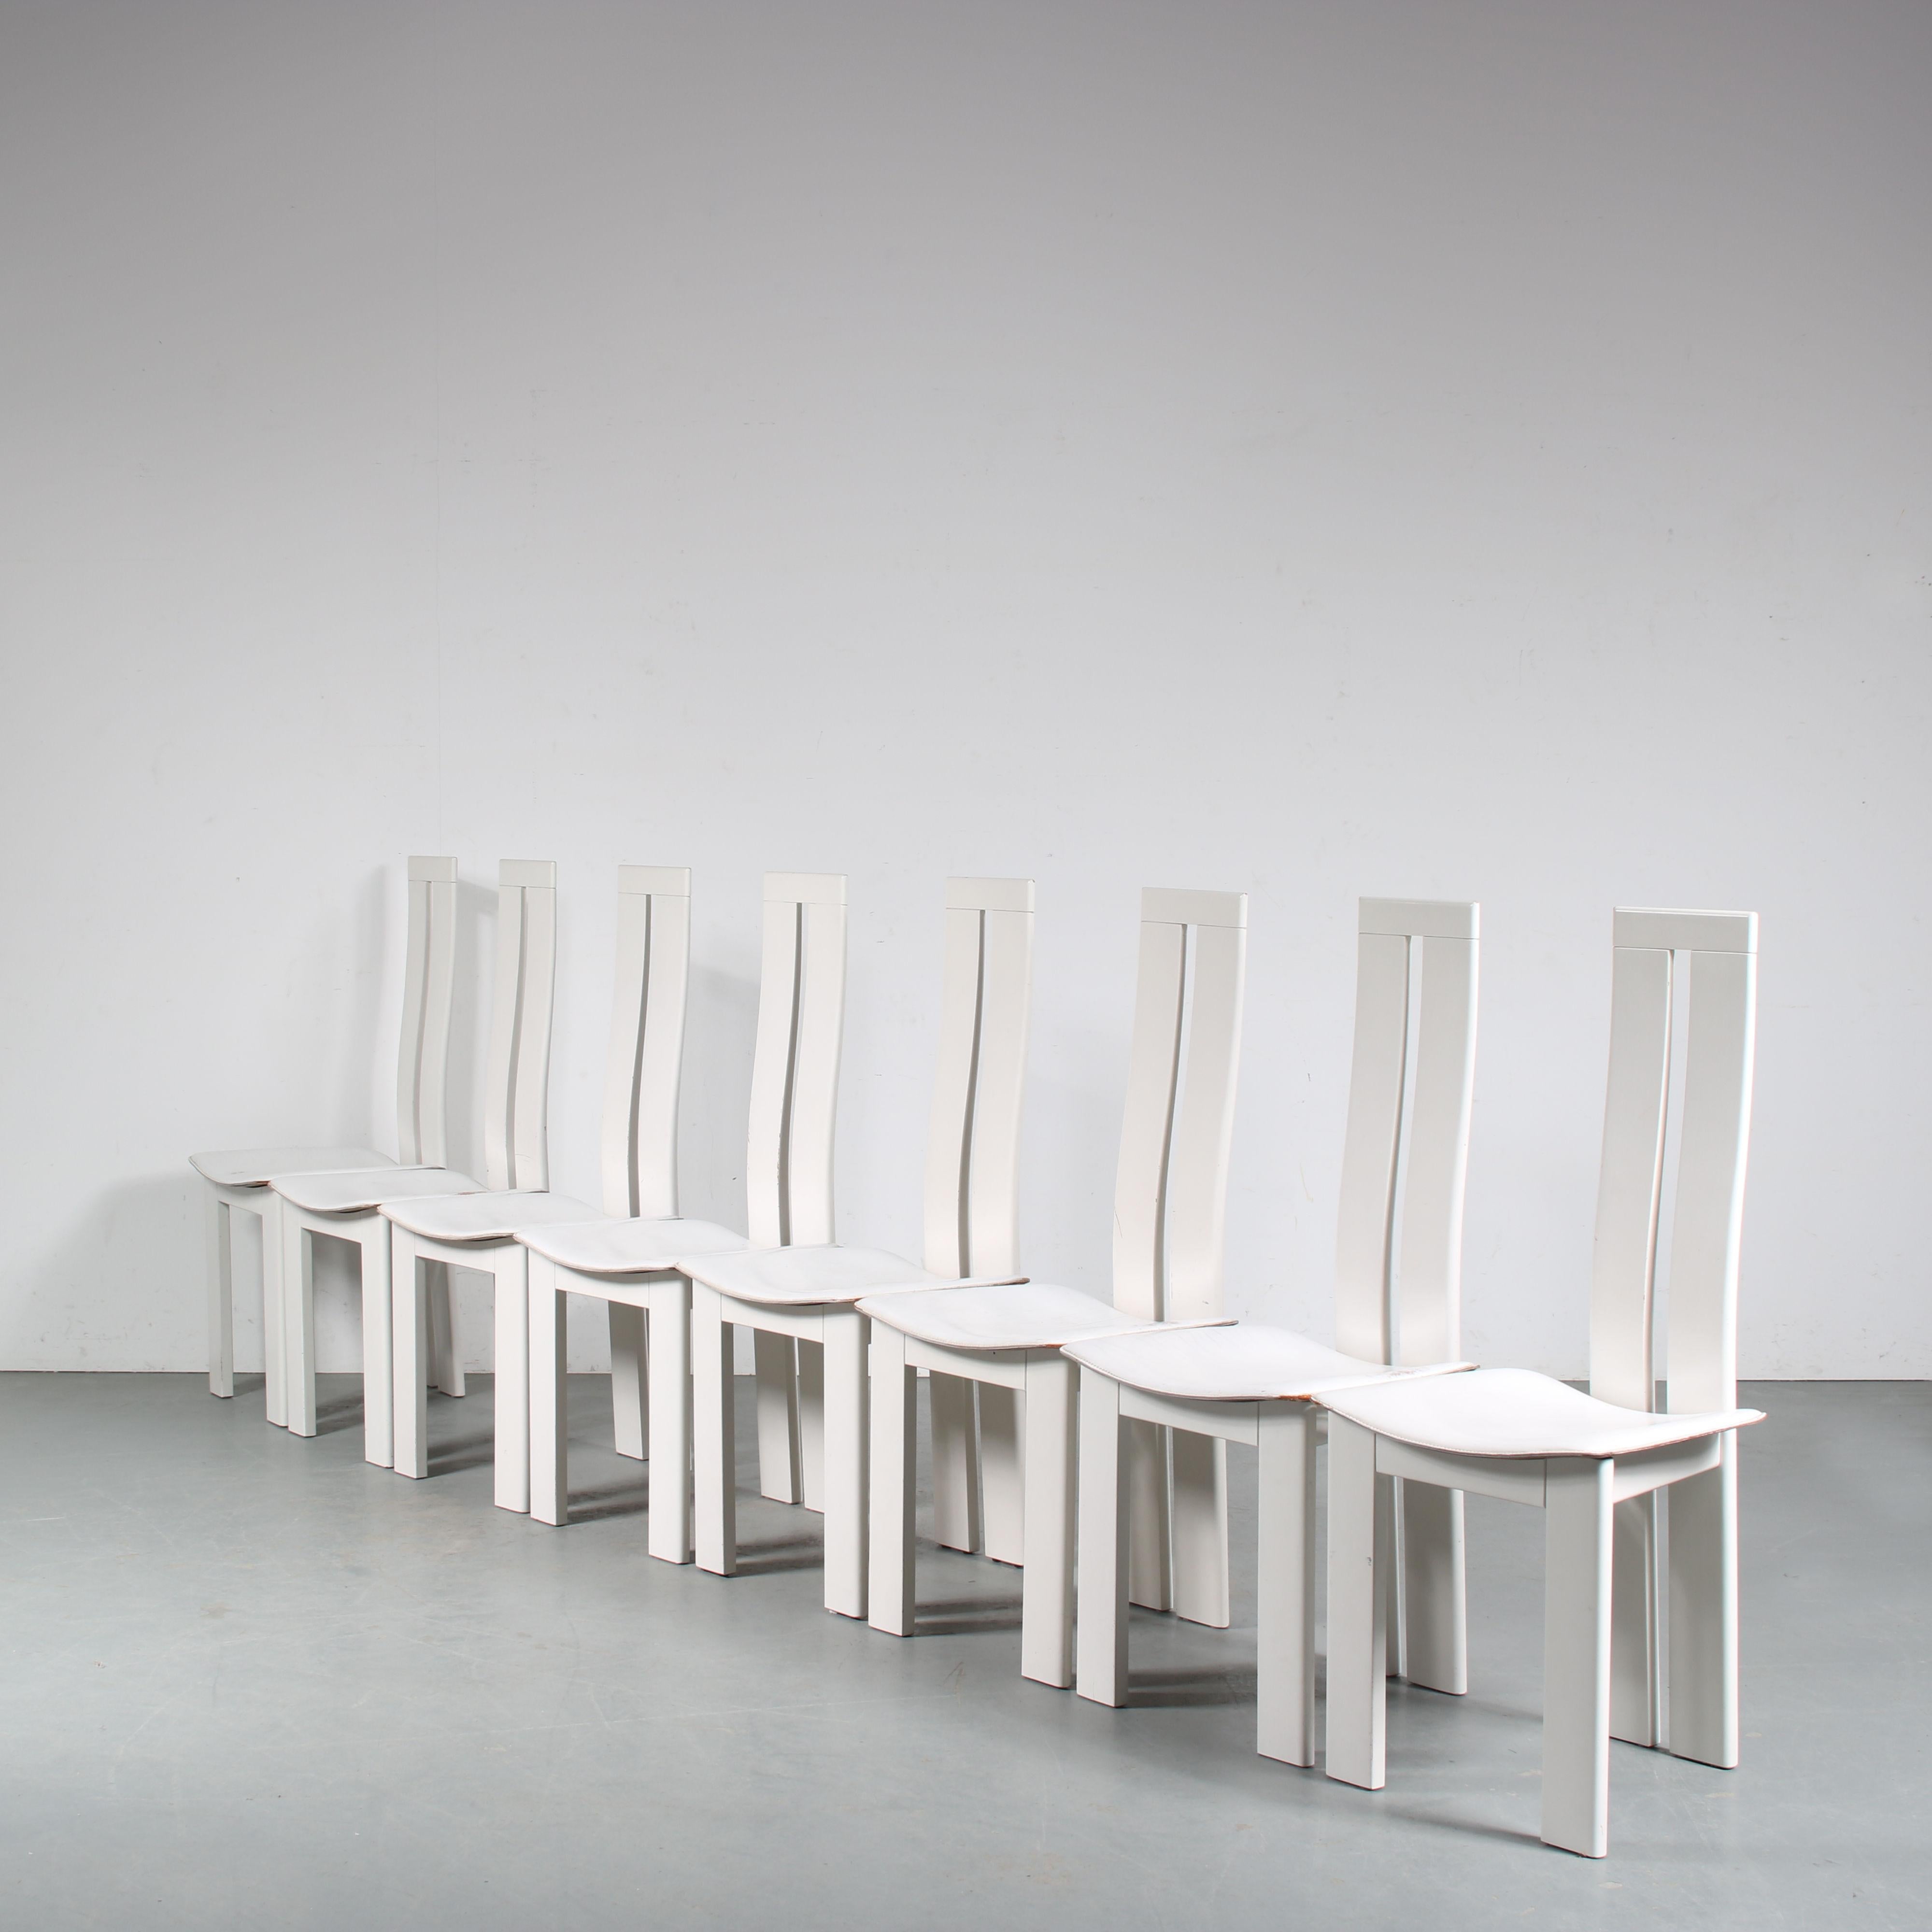 An eye-catching set of eight dining chairs designed by Pietro Costantini, manufactured by Ello in Italy around 1980.

The chairs are made of white lacquered wood, which makes them suitable for many different styles of interior! The chairs have tall